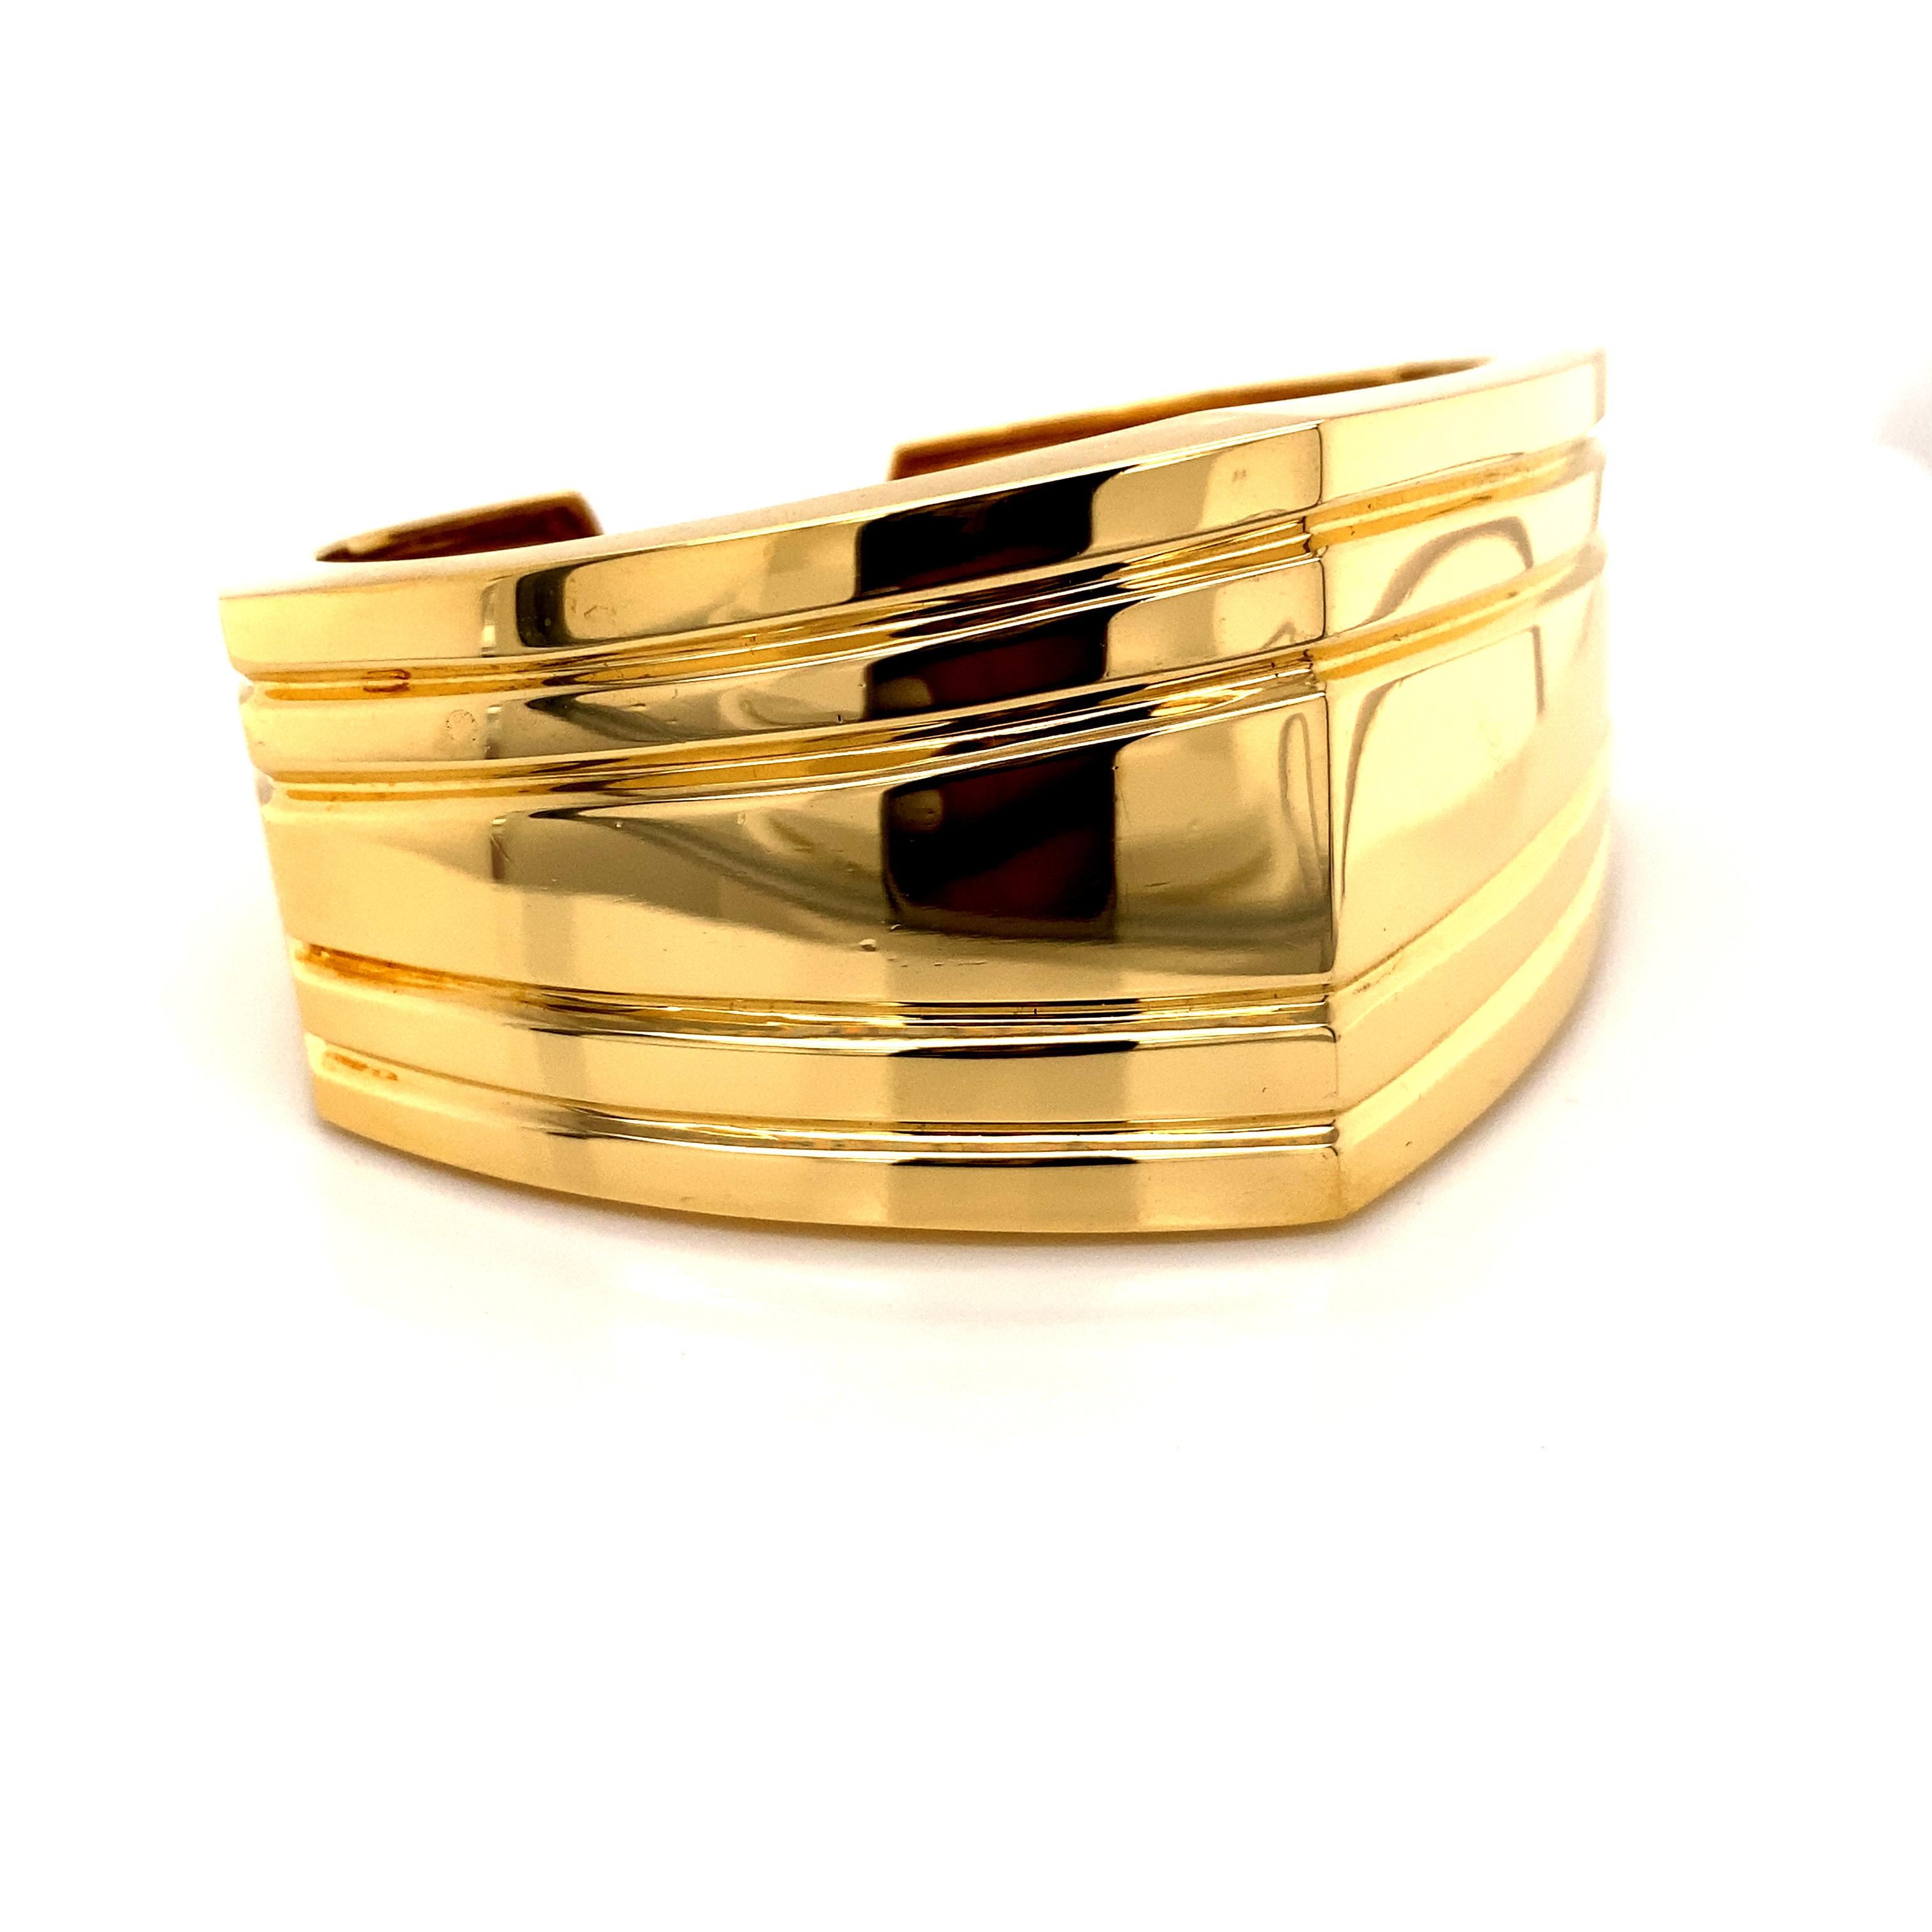 A true showcase of 1990s design aesthetics, this striking 18k yellow gold cuff bangle makes a powerful geometric statement. Crafted from luxurious 18k gold, the bangle features a bold, angular shape with an eye-catching wide silhouette. 

At its